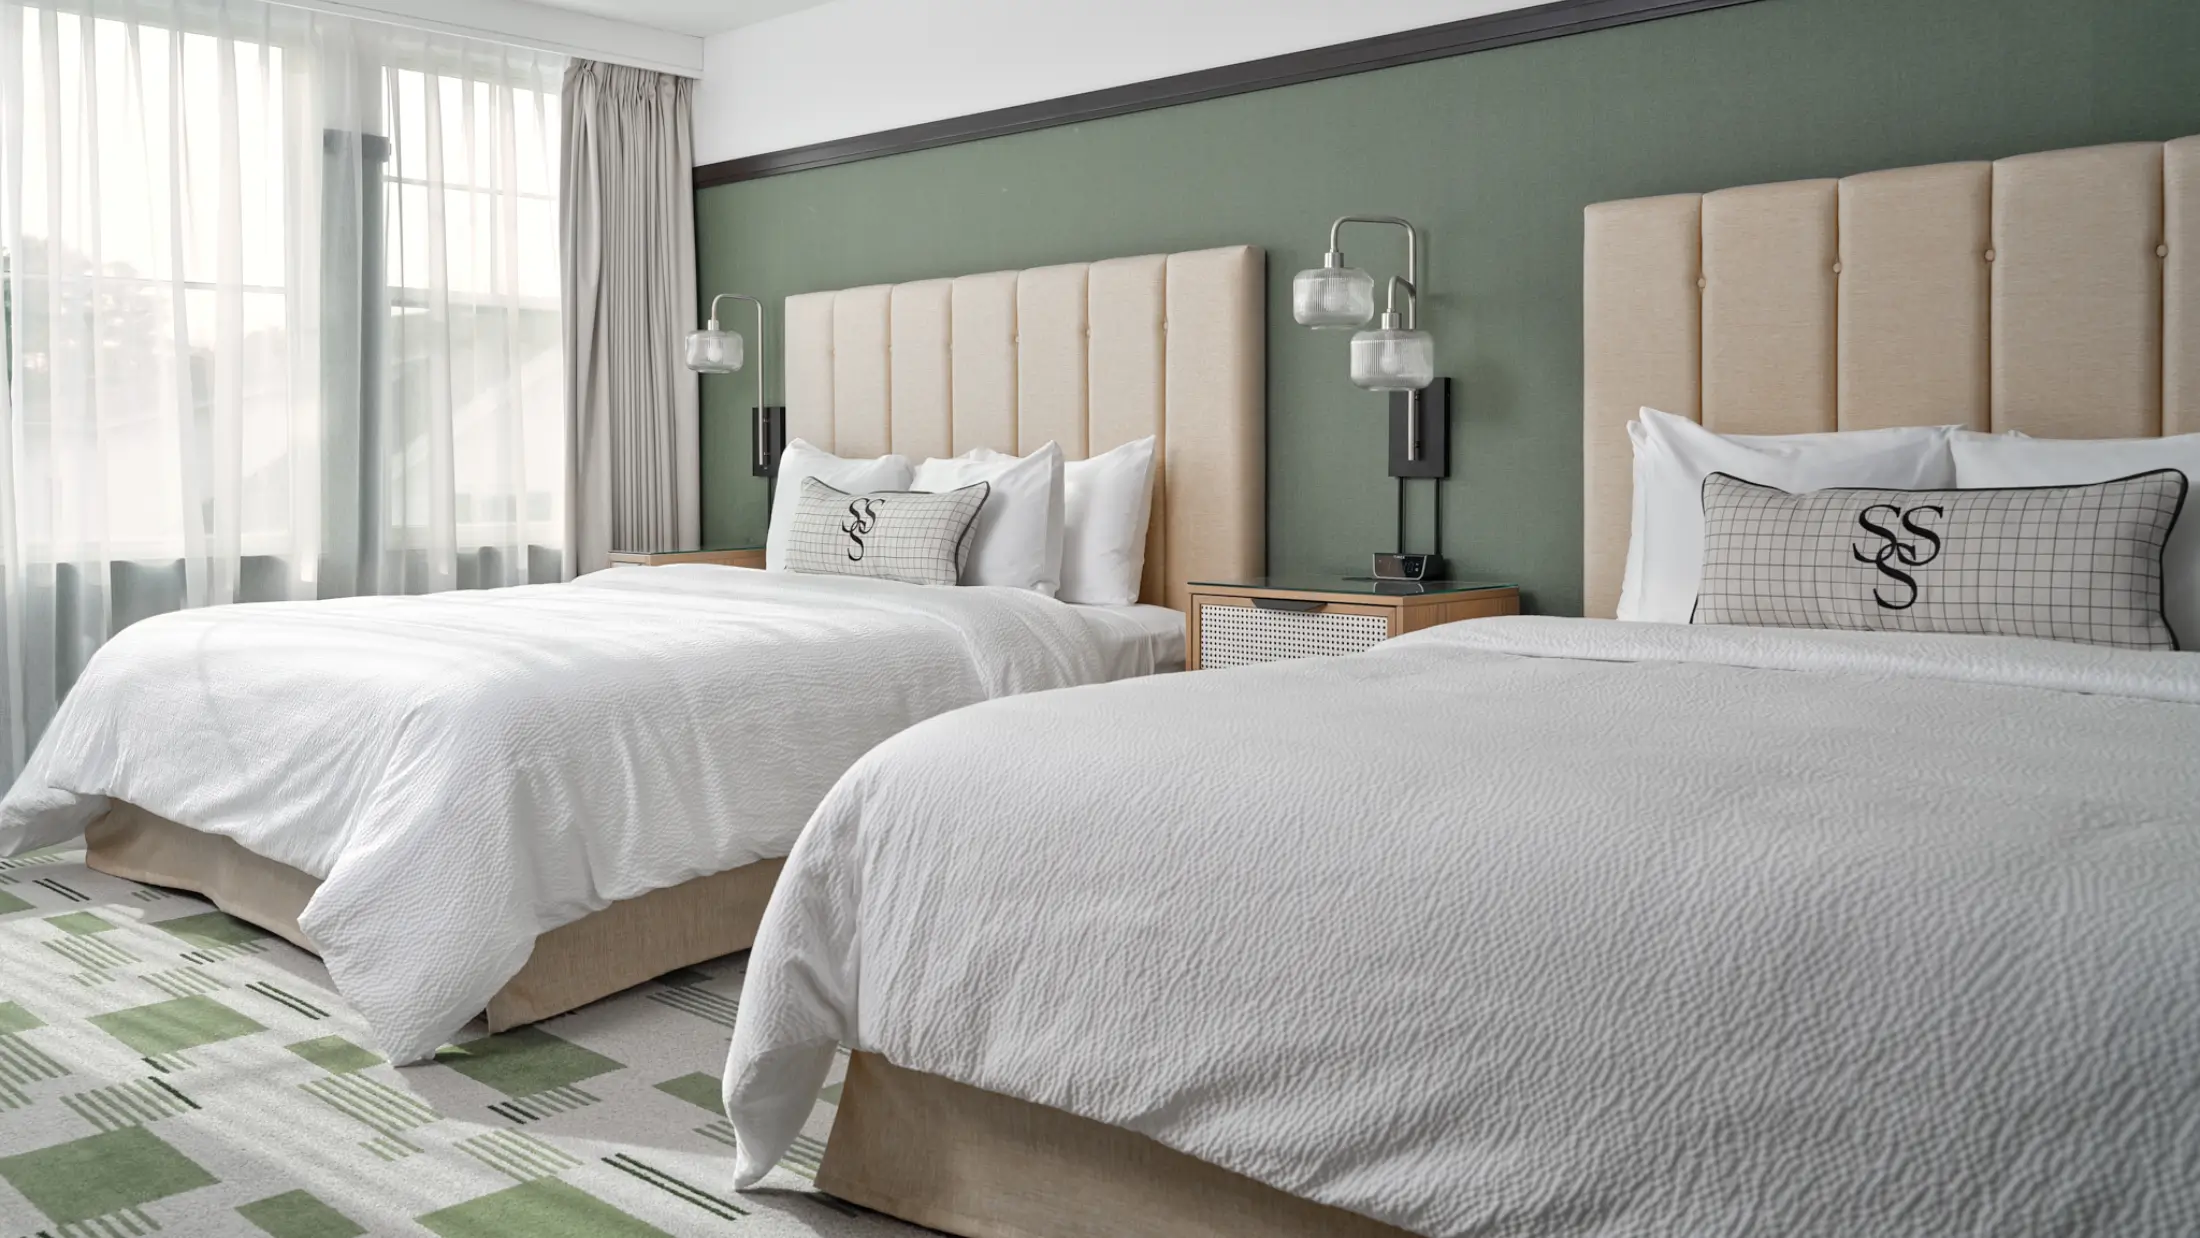 Double king guestroom with branded cushions, premium linens, and luxury amenities at Six South St Hotel in Hanover, NH.